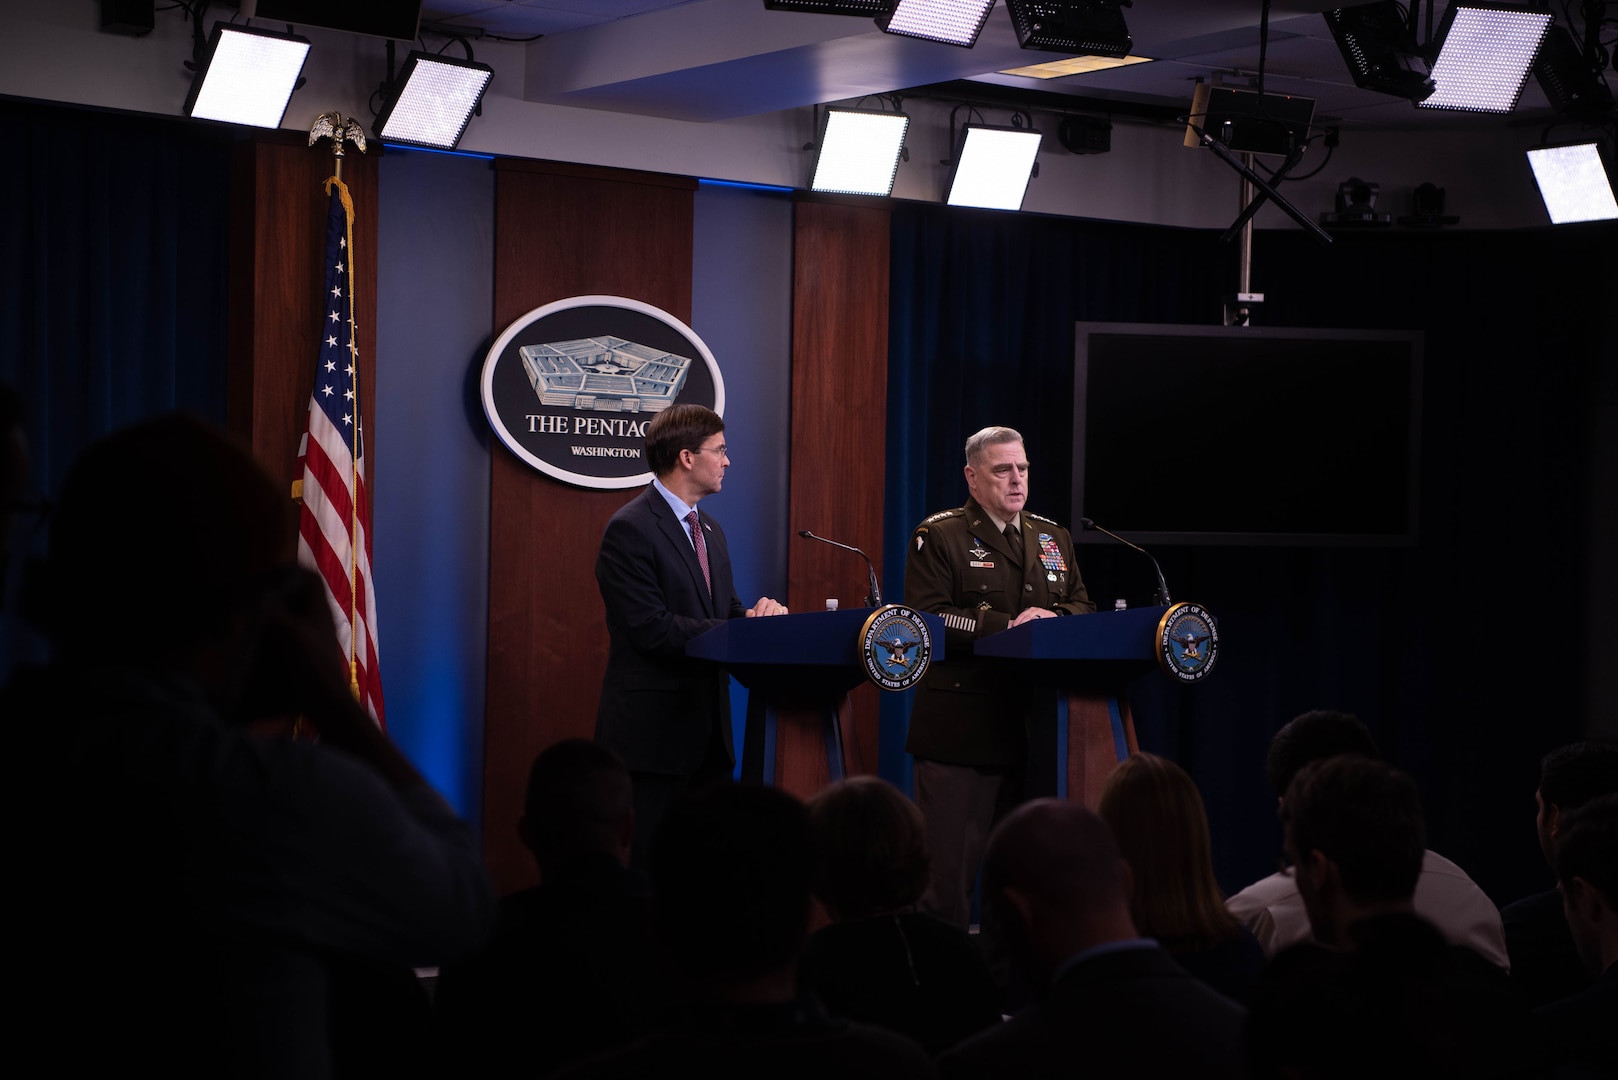 Defense Secretary Mark T. Esper and Chairman of the Joint Chiefs of Staff Army Gen. Mark A. Milley brief the media at the Pentagon, Washington D.C., Dec. 20, 2019.